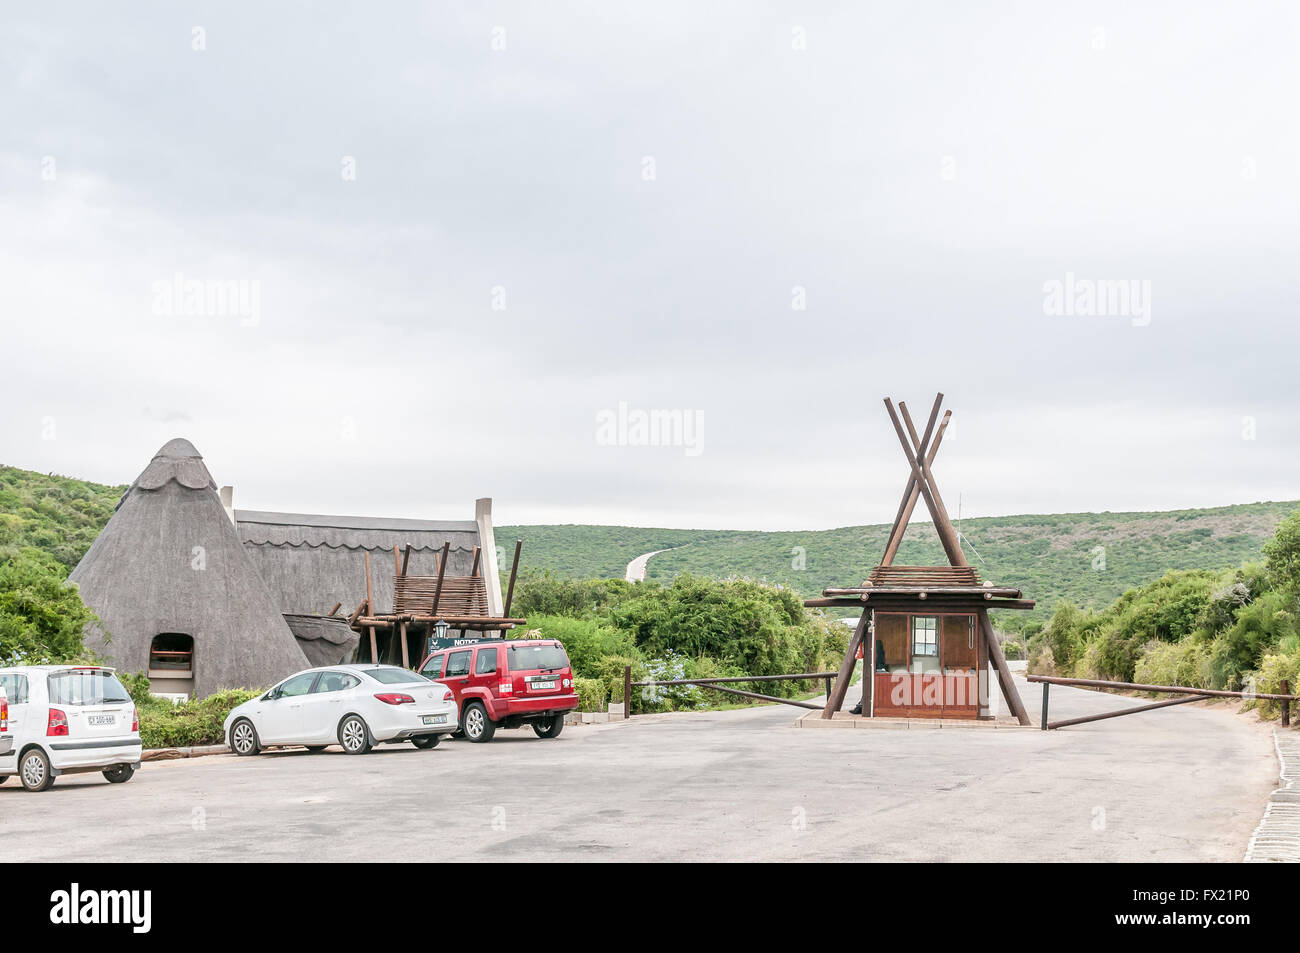 ADDO ELEPHANT NATIONAL PARK, SOUTH AFRICA - FEBRUARY 26, 2016: The Matyholweni reception office and entrance gate Stock Photo